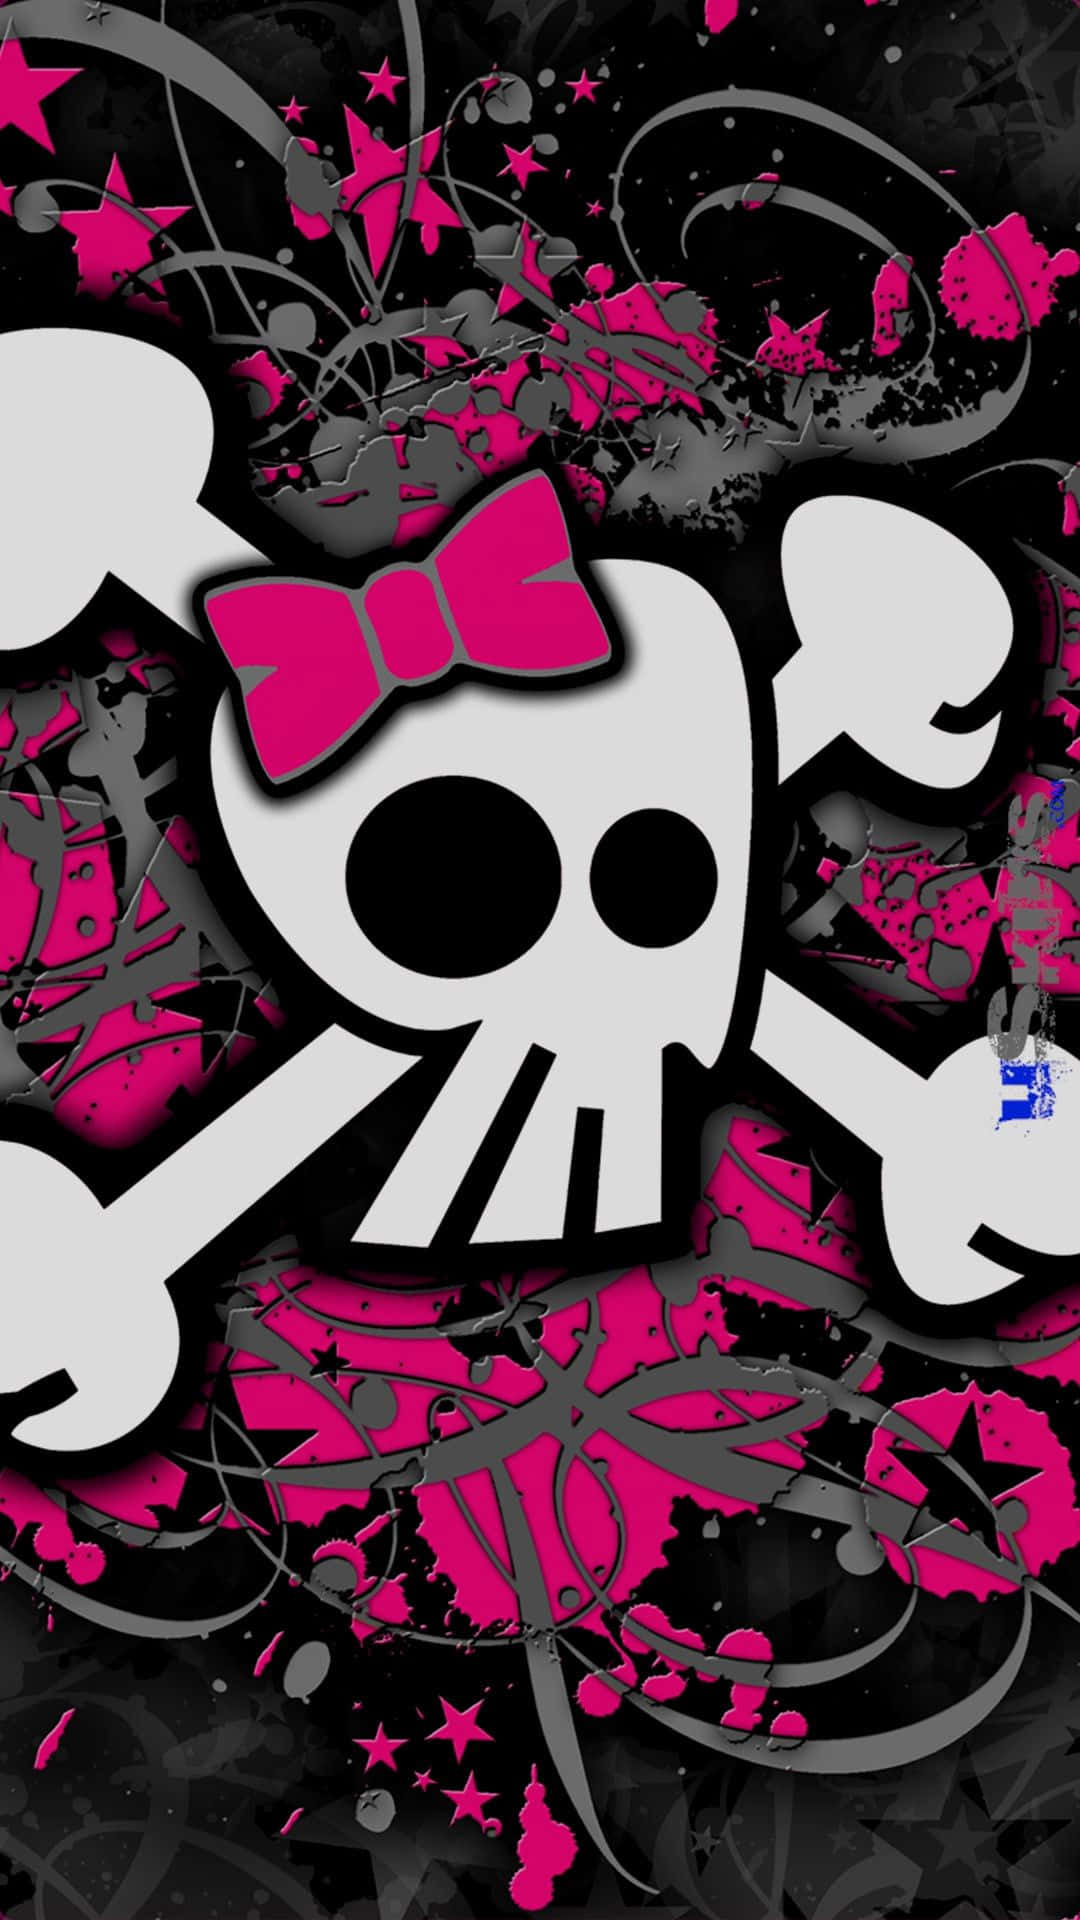 The stylish fusion of soft femininity and edgy attitude with this girly skull. Wallpaper